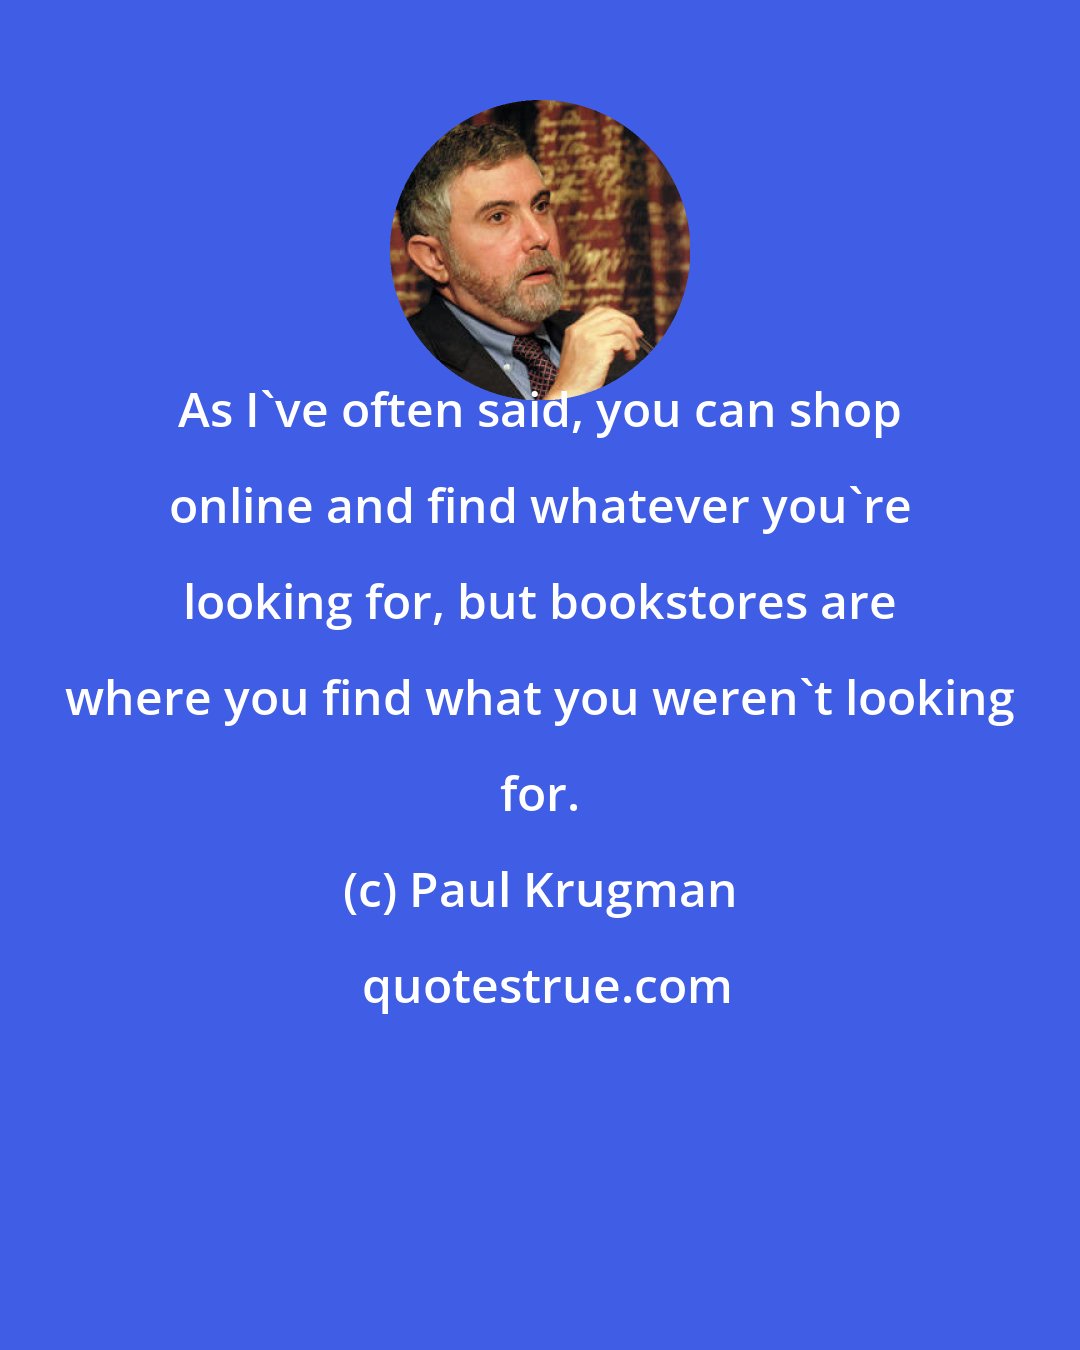 Paul Krugman: As I've often said, you can shop online and find whatever you're looking for, but bookstores are where you find what you weren't looking for.